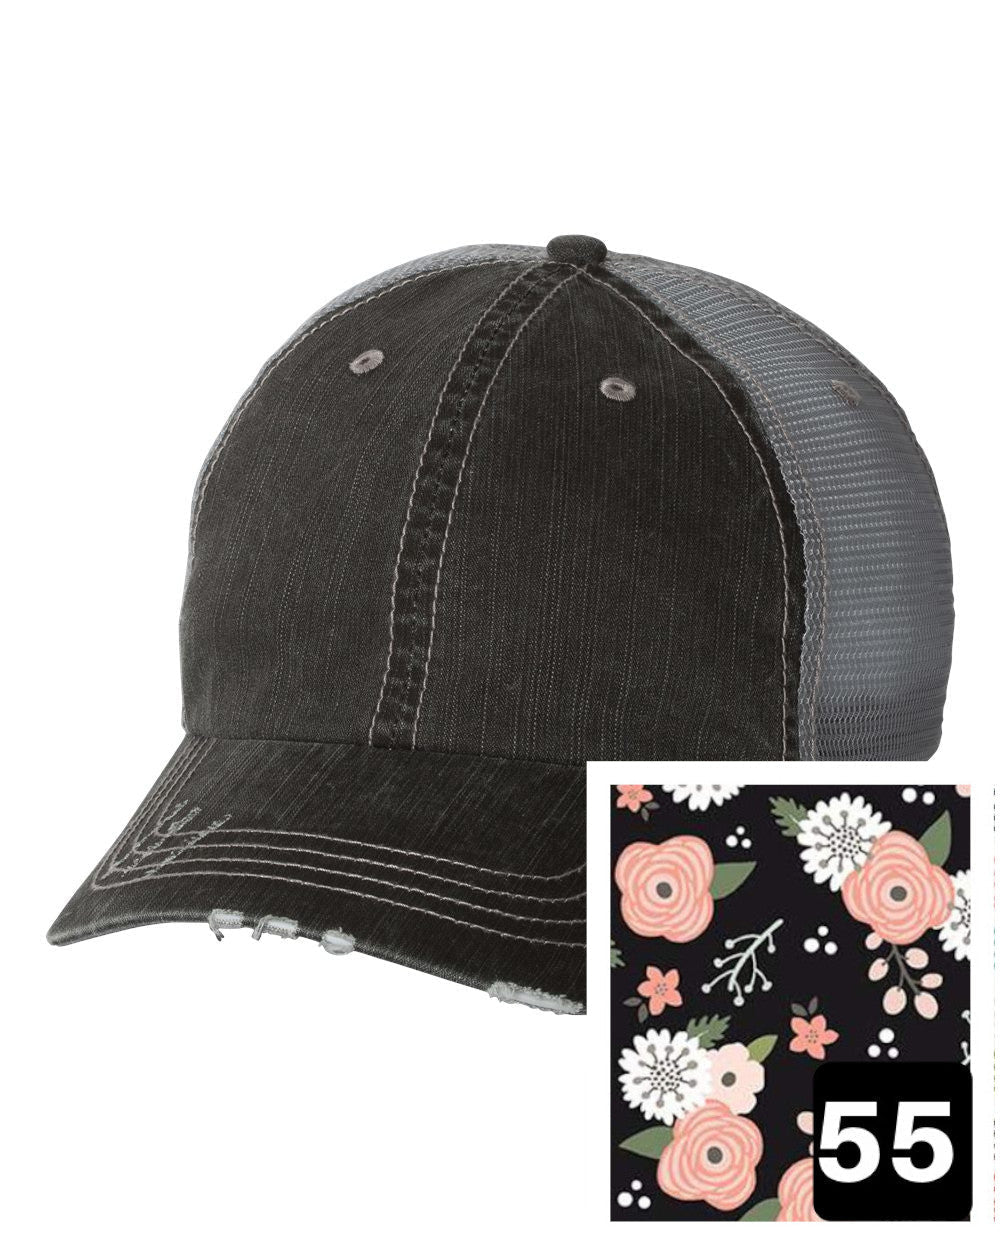 gray distressed trucker hat with petite floral on navy fabric state of Idaho